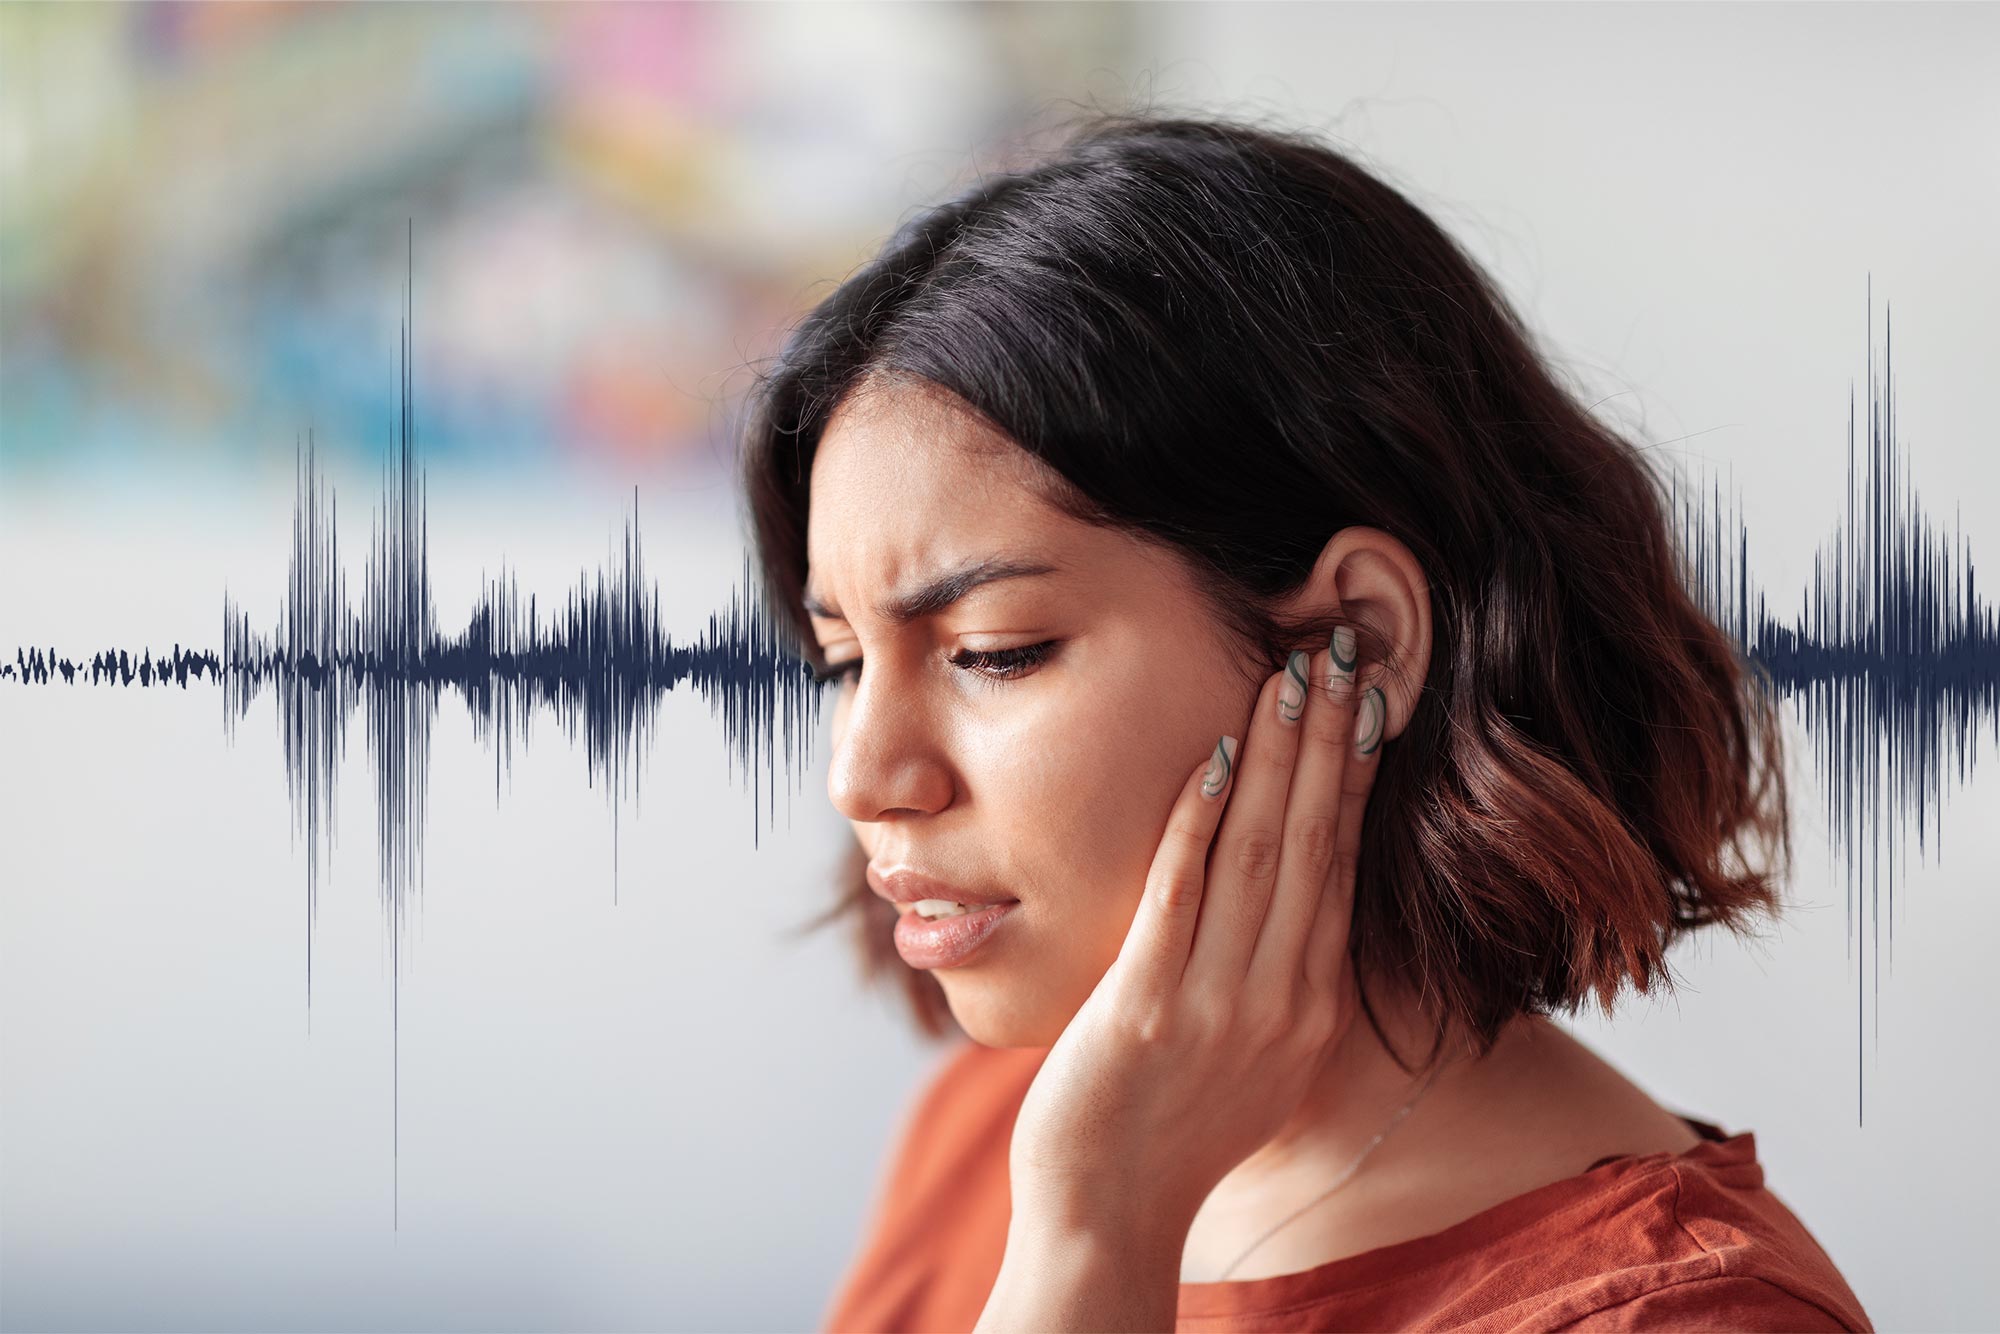 Woman covering her ear with a soundwave in the background of the photo